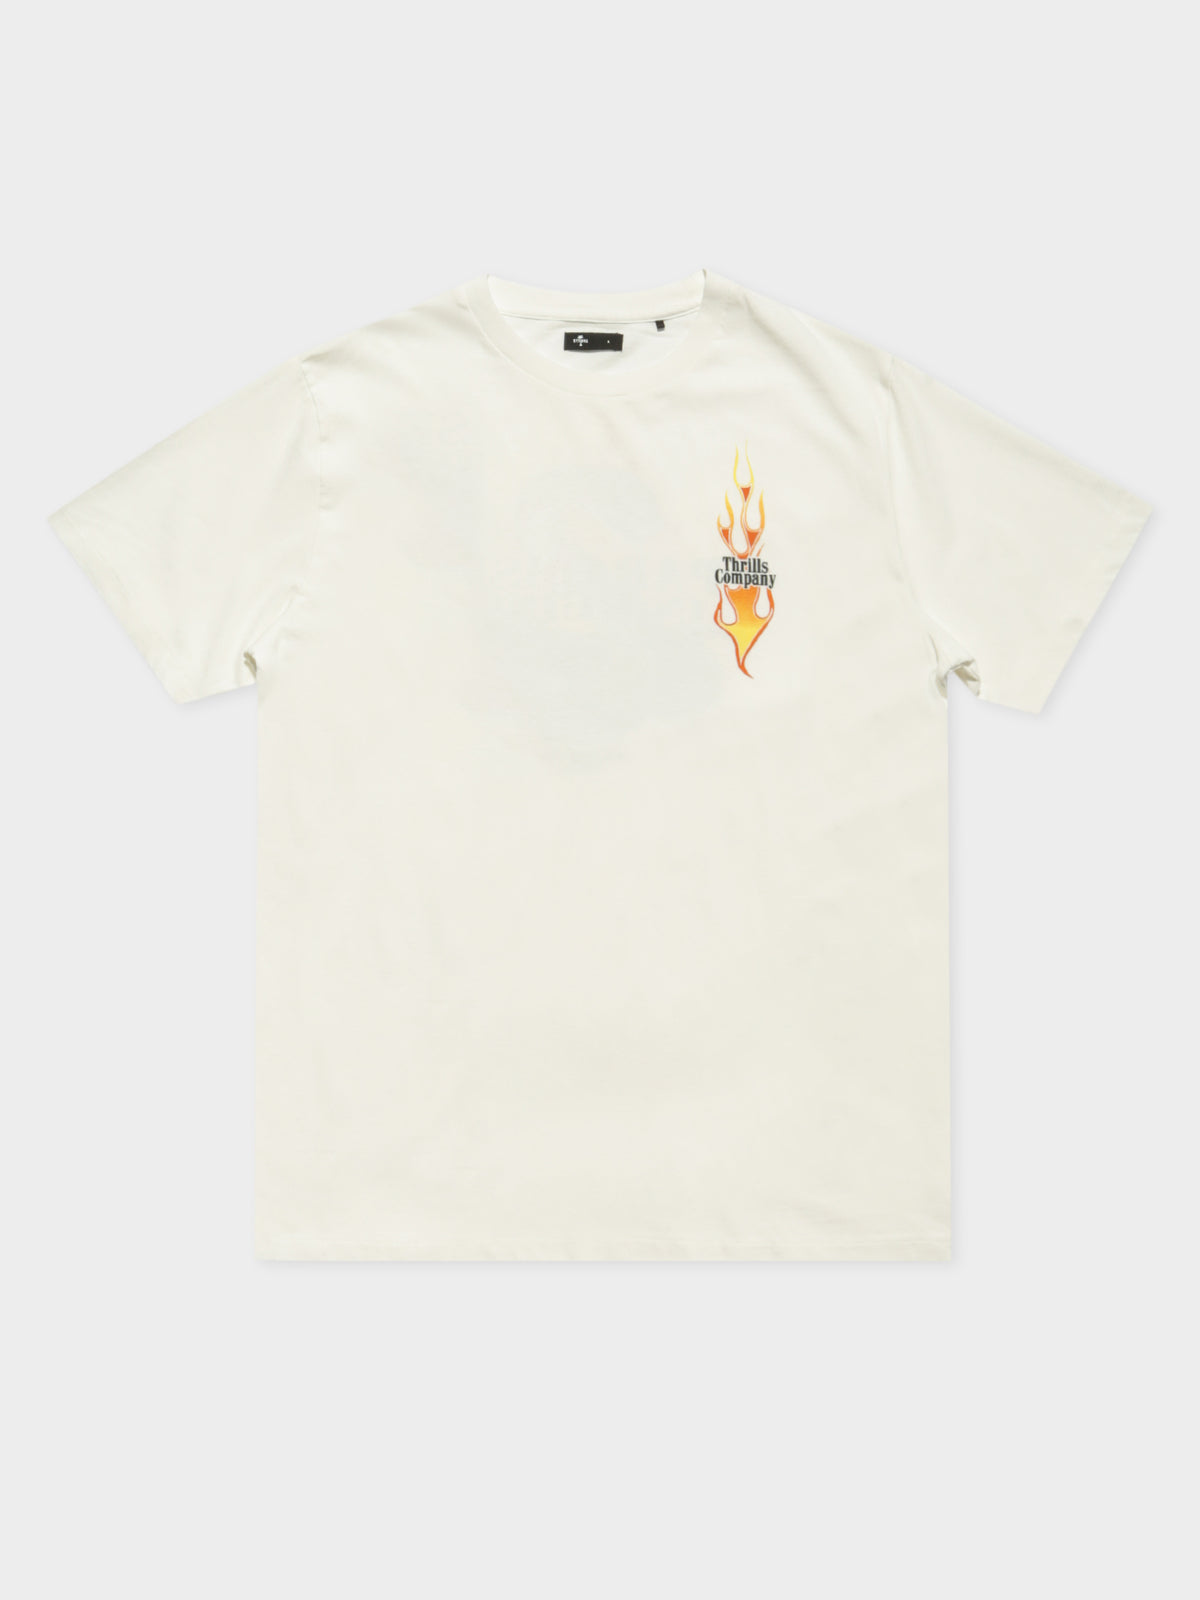 Power In Paradise Merch T-Shirt in Dirty White